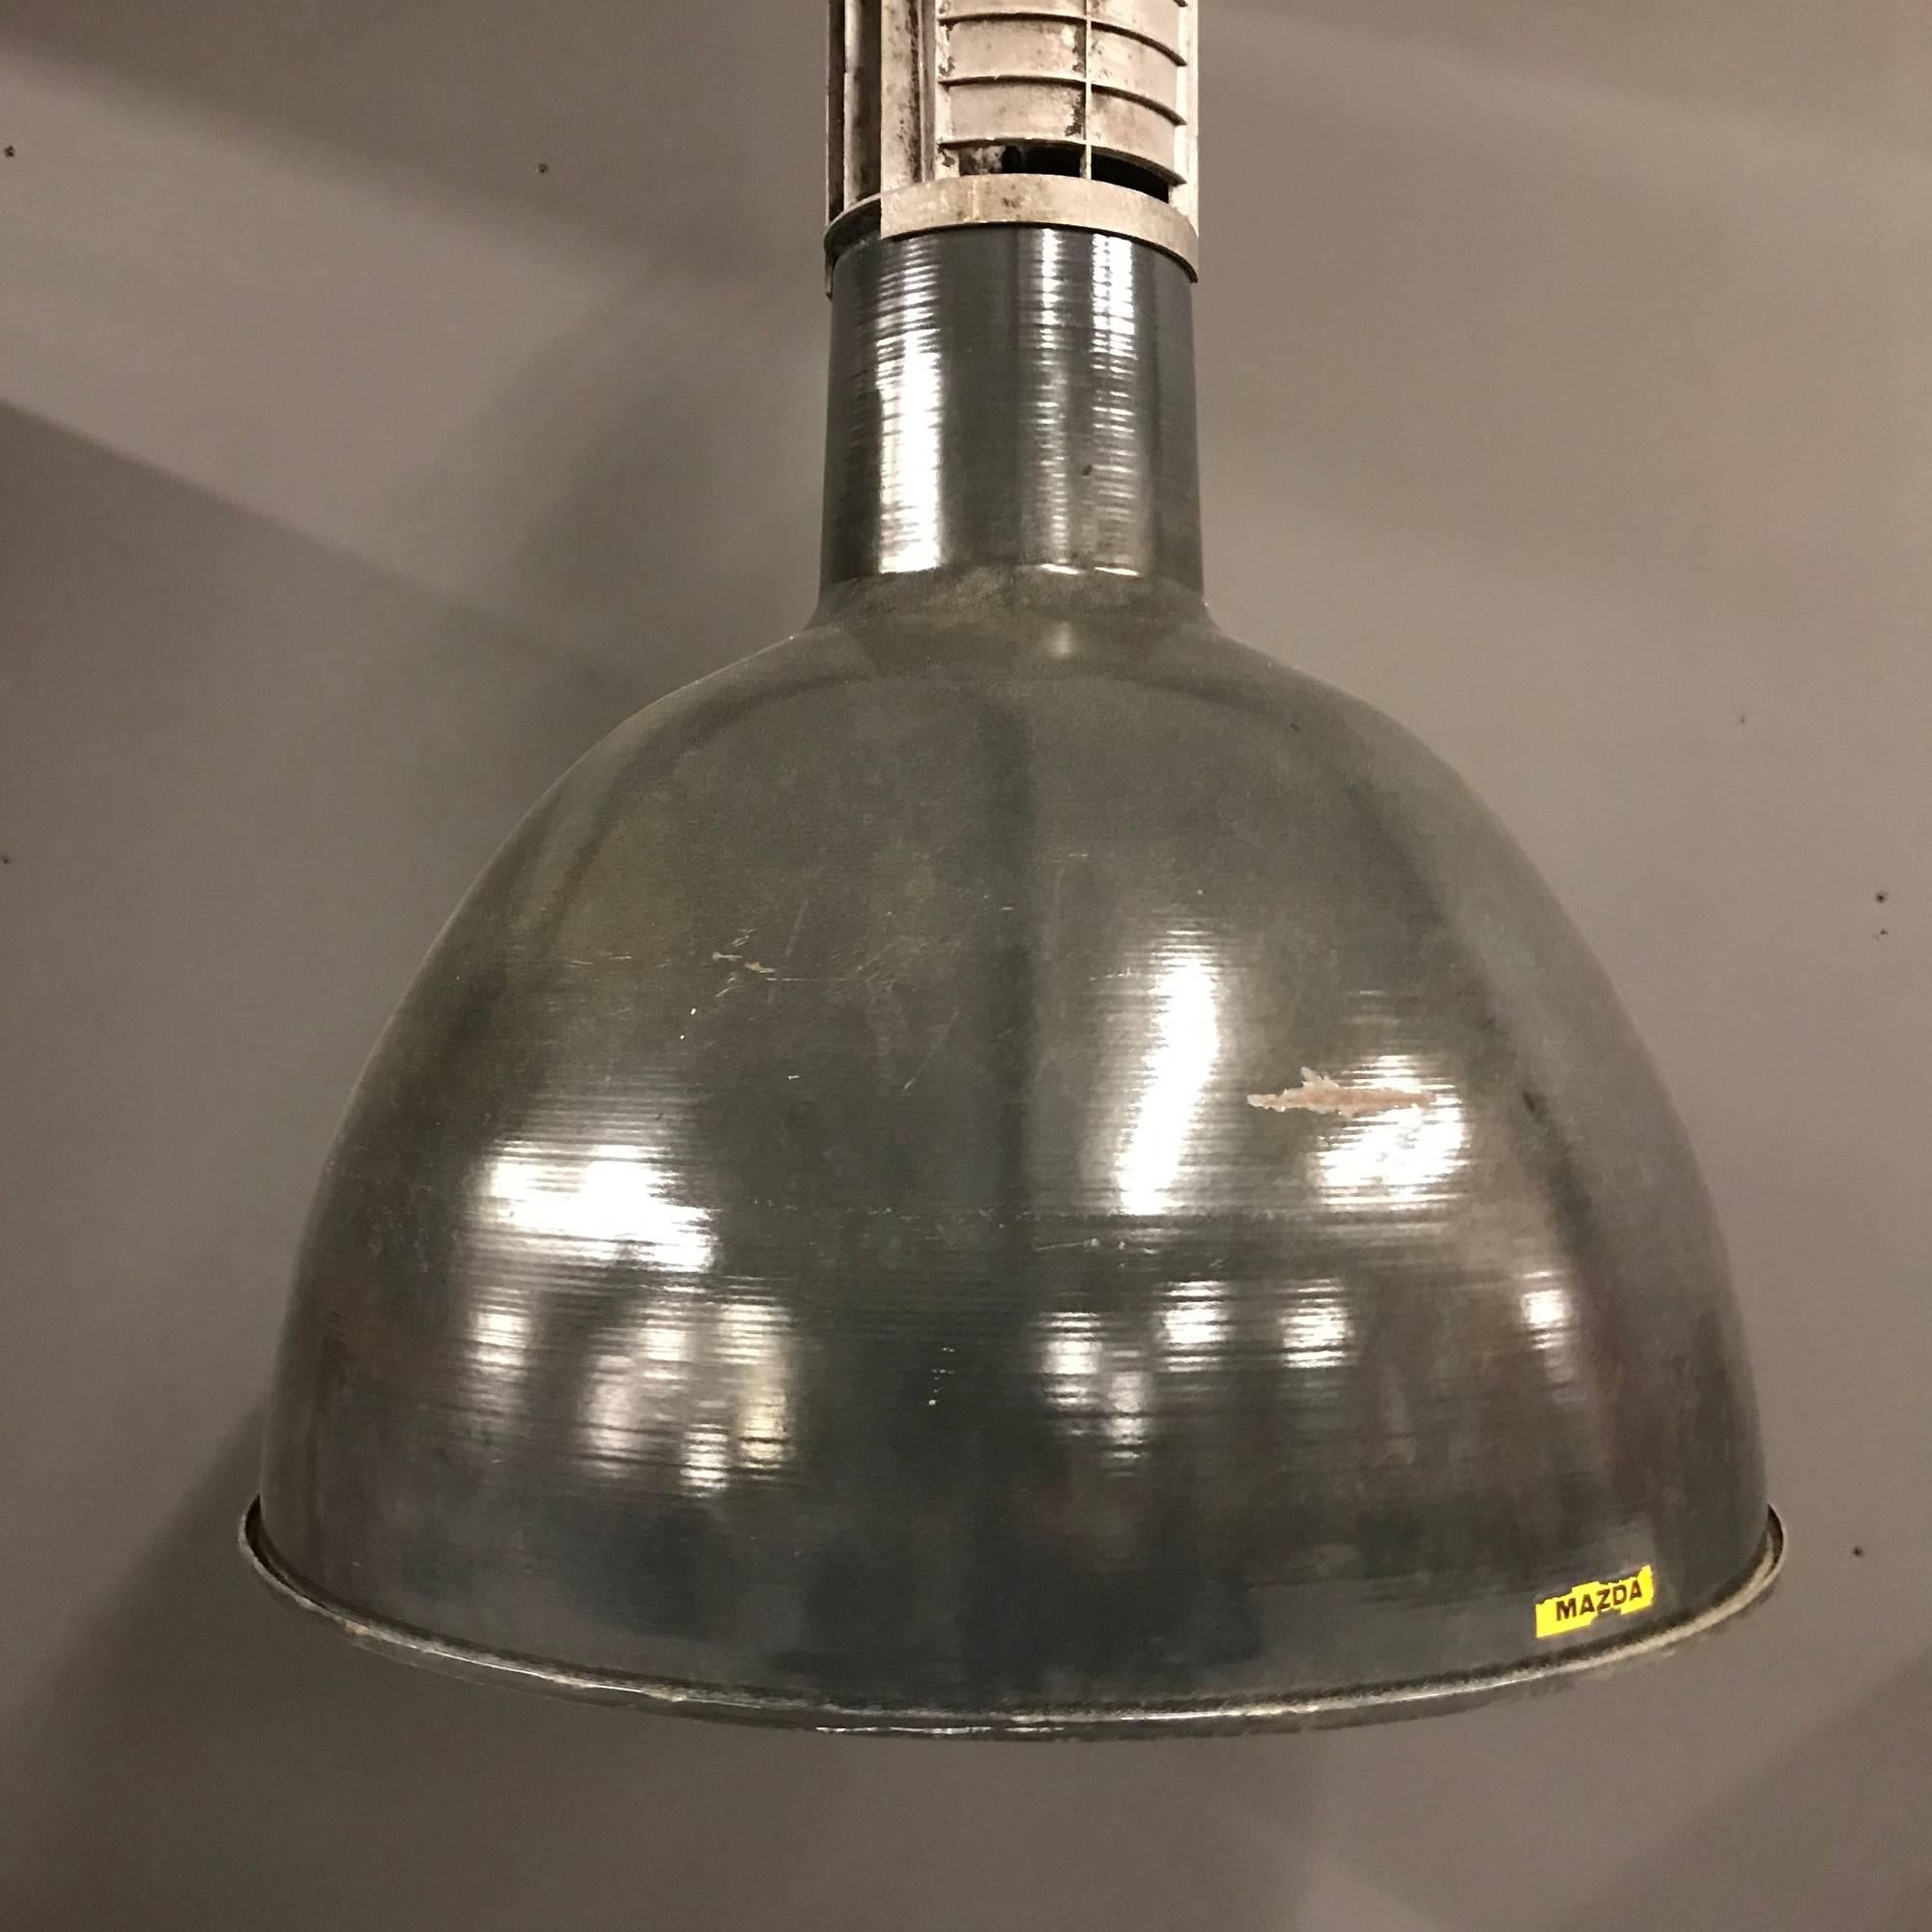 Enormous French Industrial Black Enamel Factory Pendant Light by Mazda For Sale 4